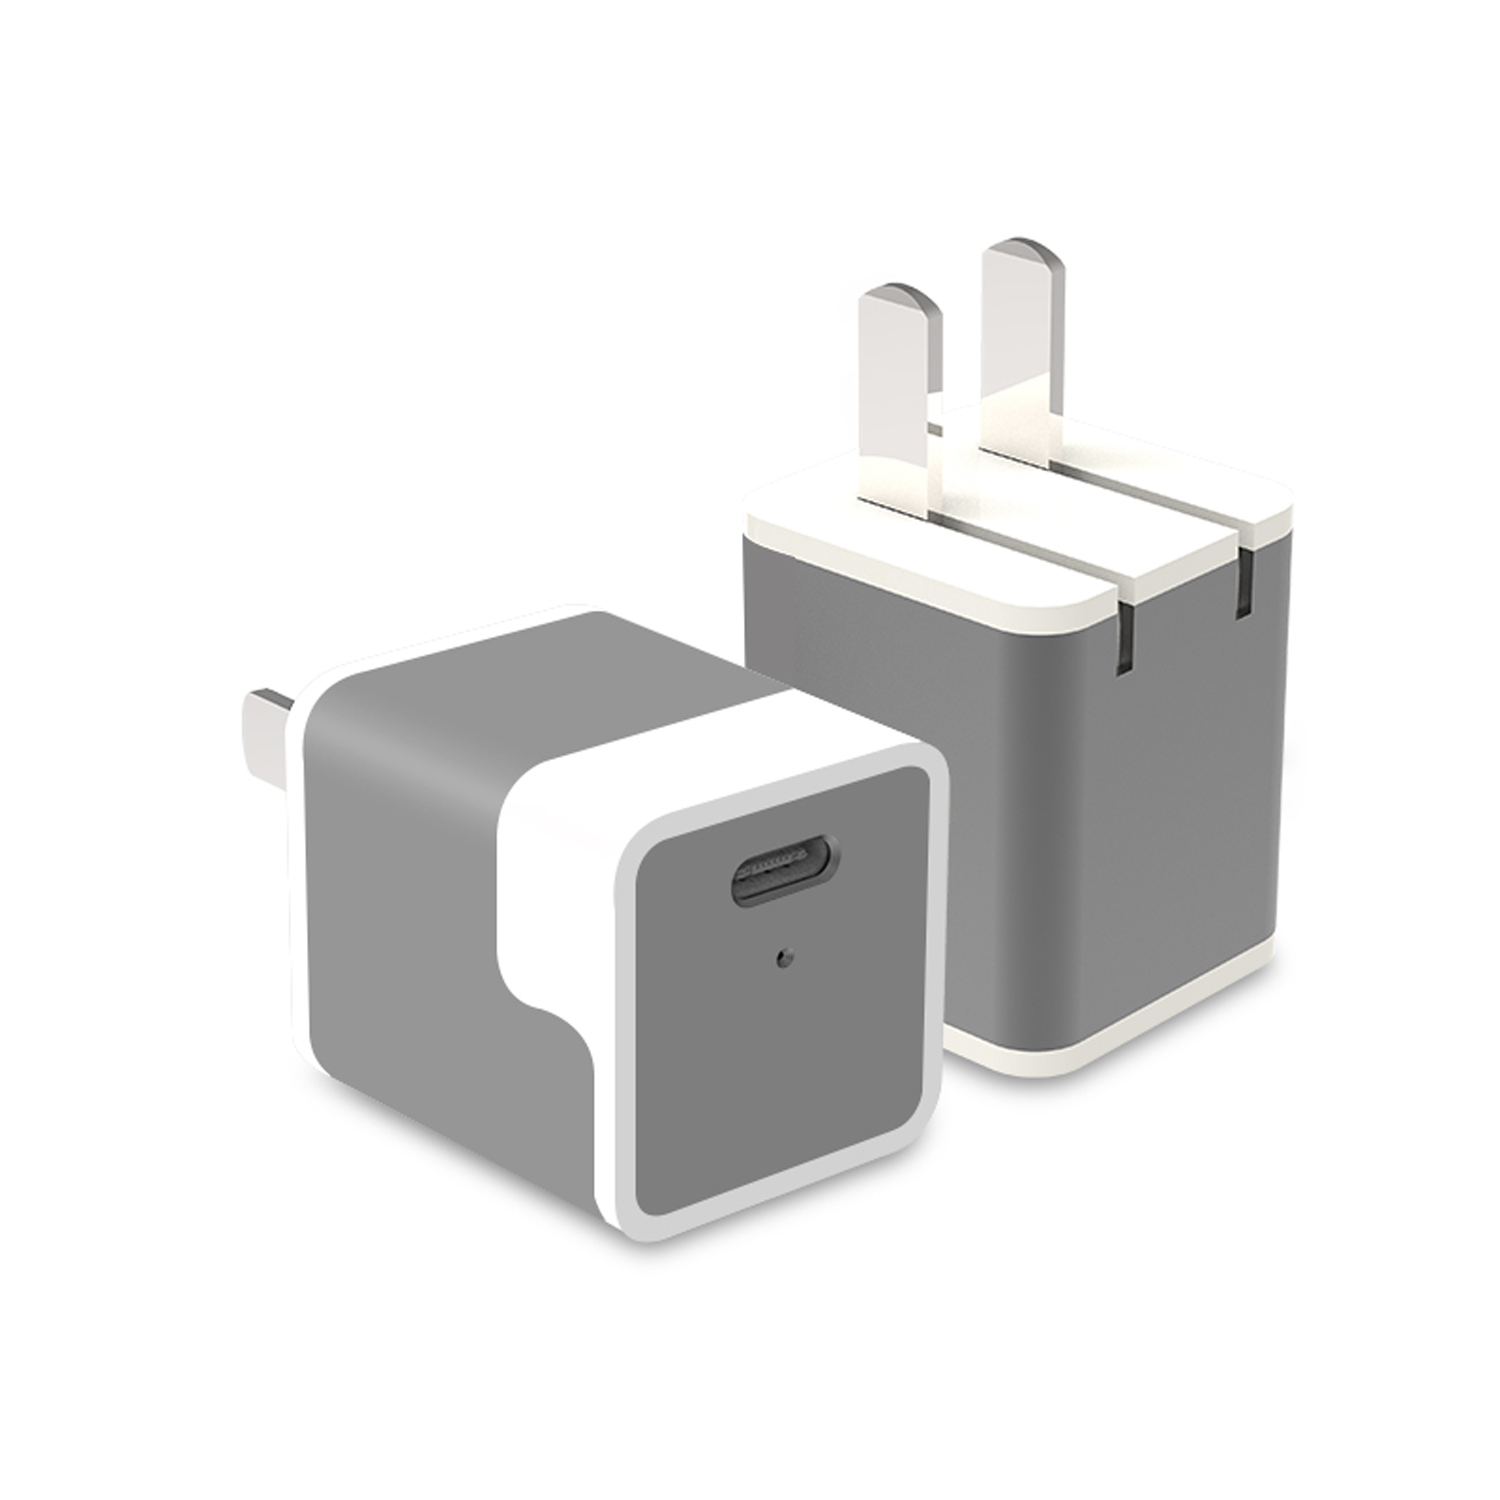 20w fast charge portble power adapter for iphone Featured Image